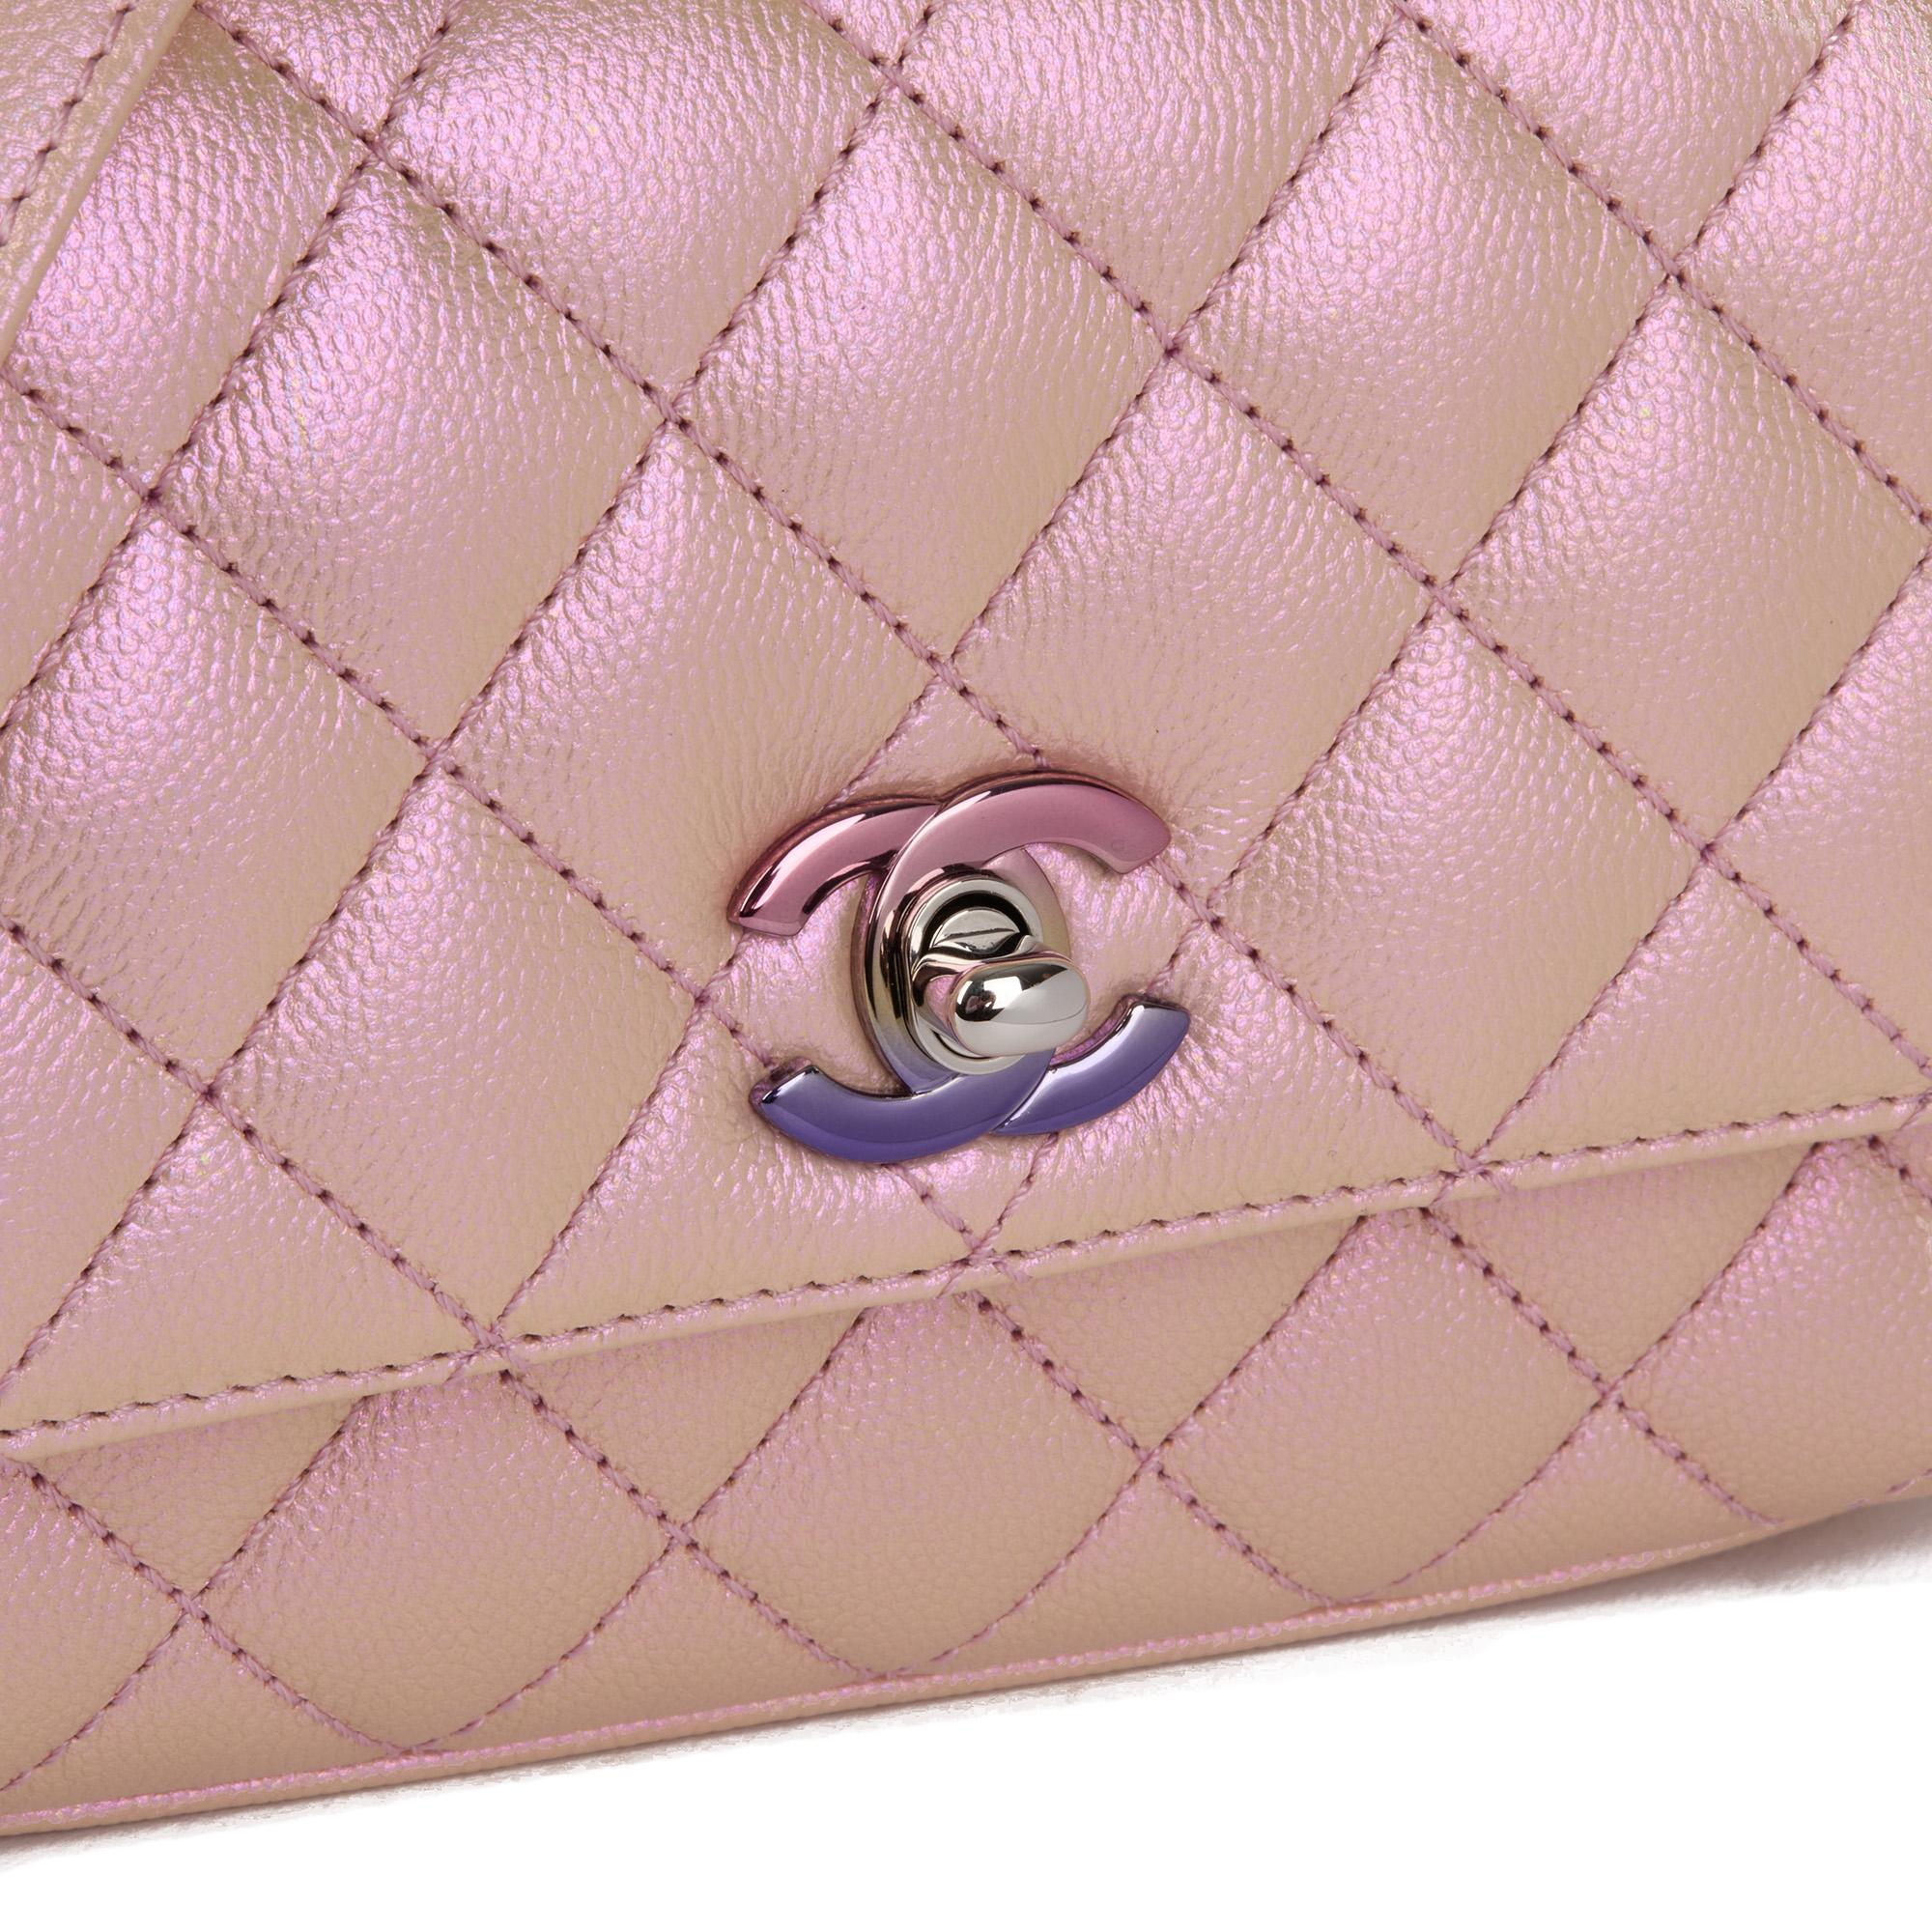 CHANEL Iridescent Pink Quilted Caviar Leather Mini Coco Top Handle In Excellent Condition For Sale In Bishop's Stortford, Hertfordshire